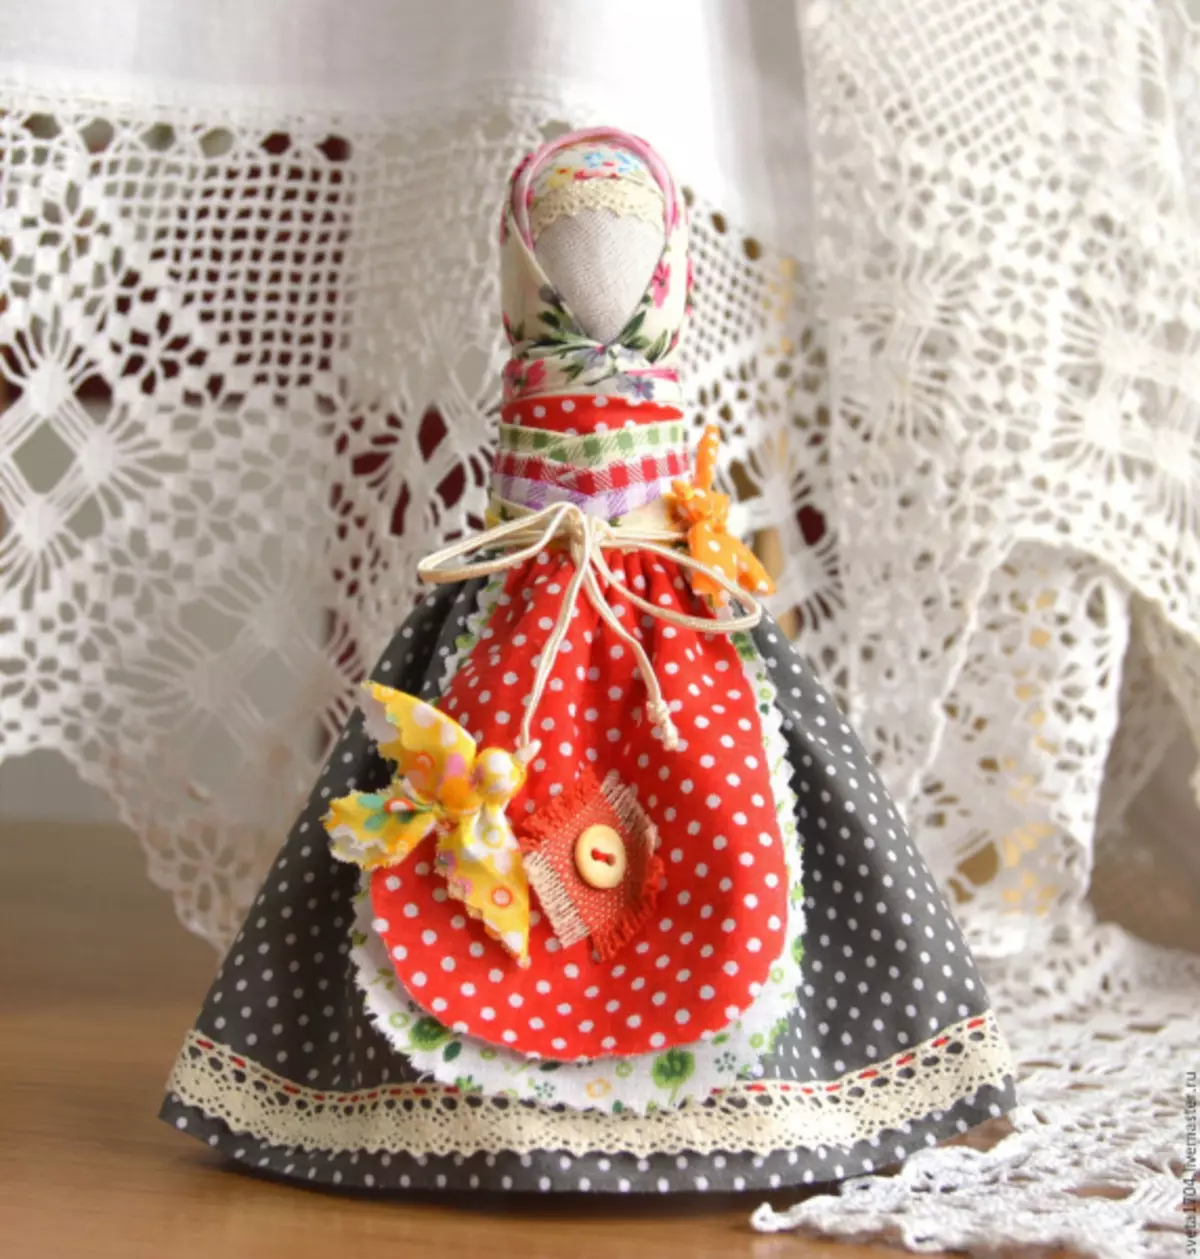 Russian folk doll from threads: master class with photo